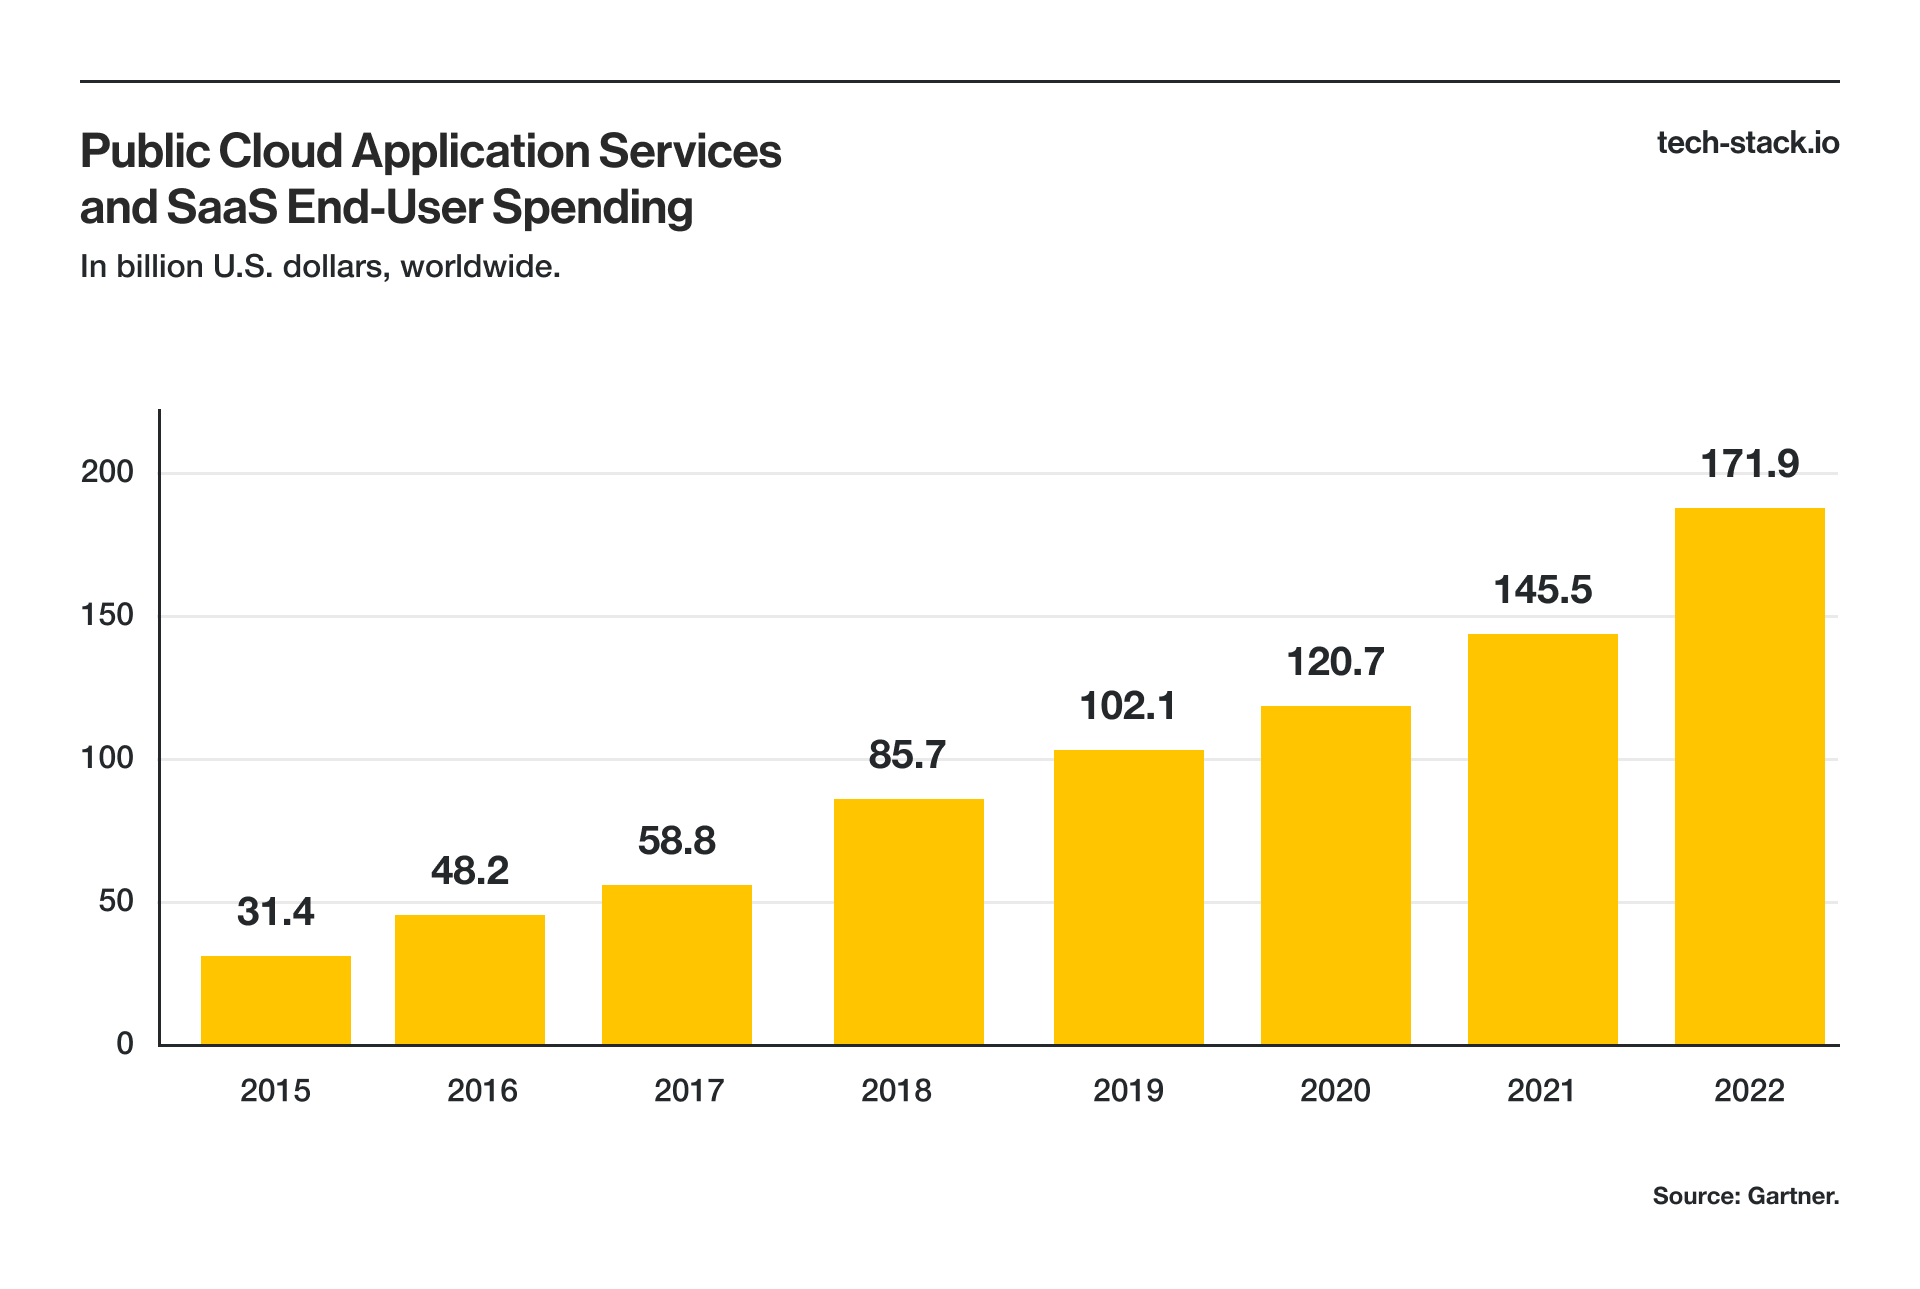 Public Cloud Application Services and SaaS End-User Spending